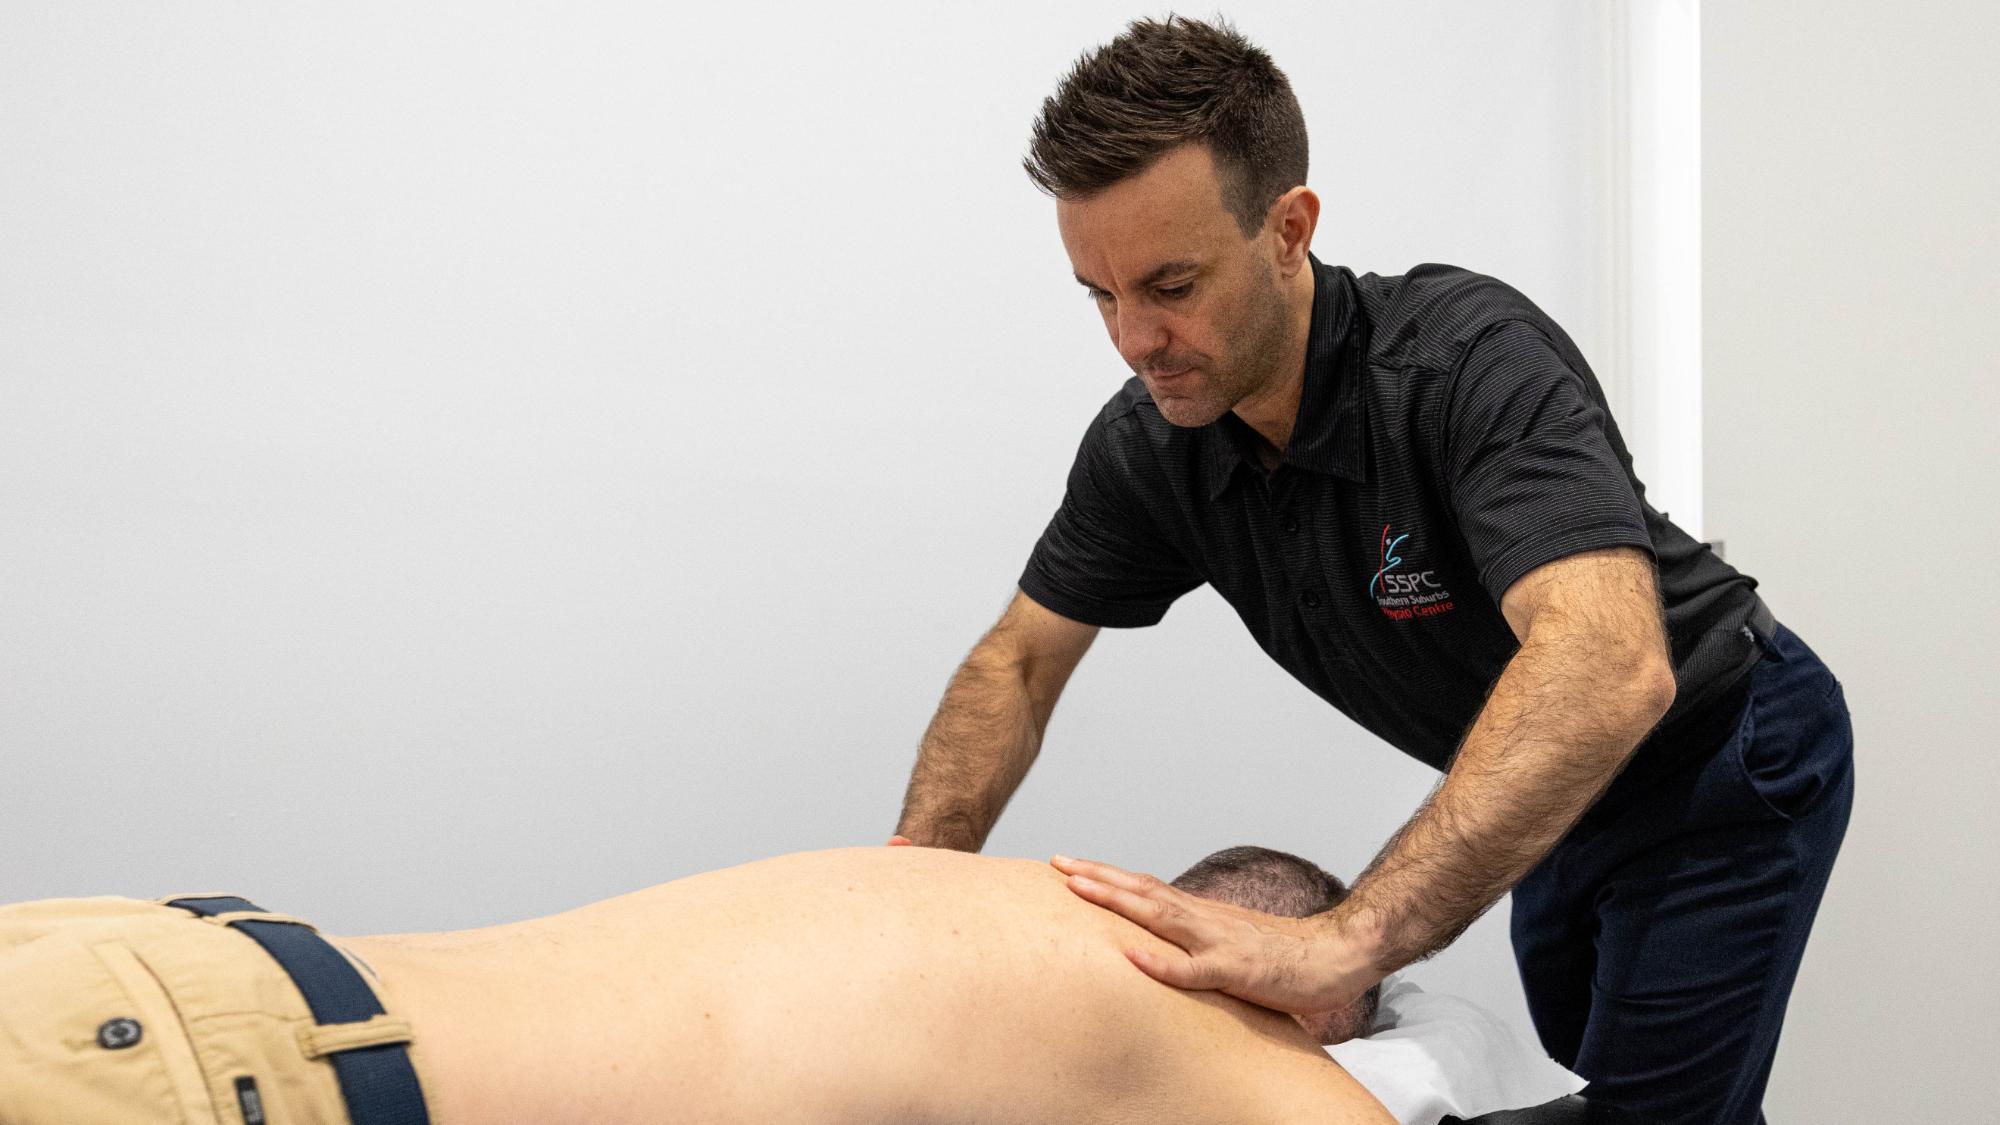 A young man receiving a healing massage from a specialised physiotherapist at a clinic in Bentleigh East, Melbourne. There is a white background and the masseuse is remedying the young man's shoulder pain.